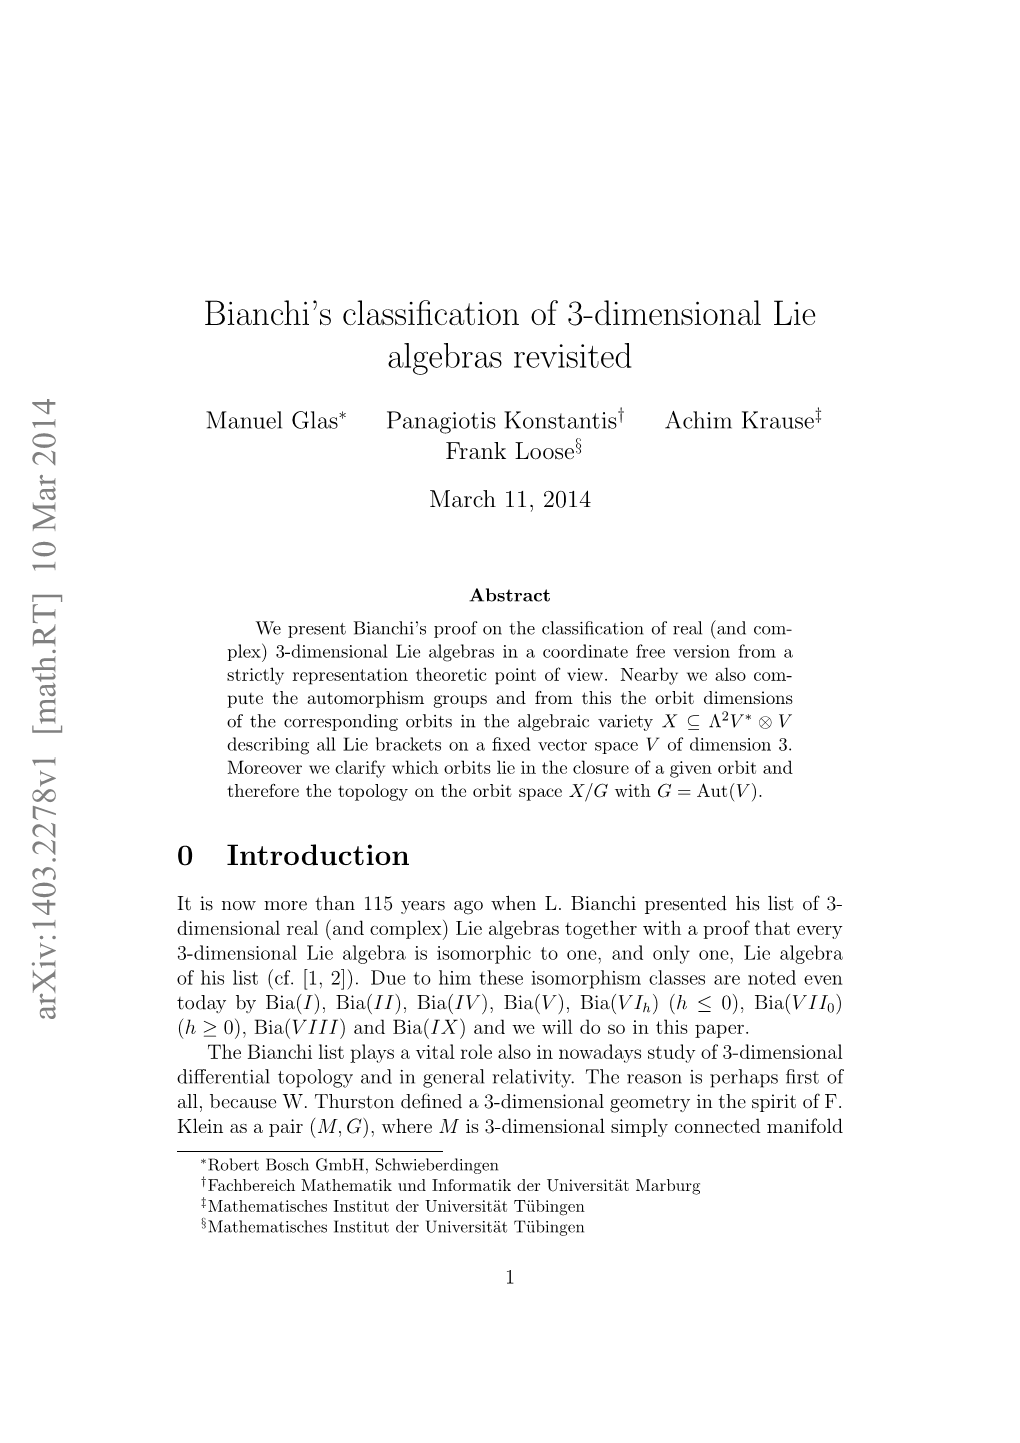 Bianchi's Classification of 3-Dimensional Lie Algebras Revisited